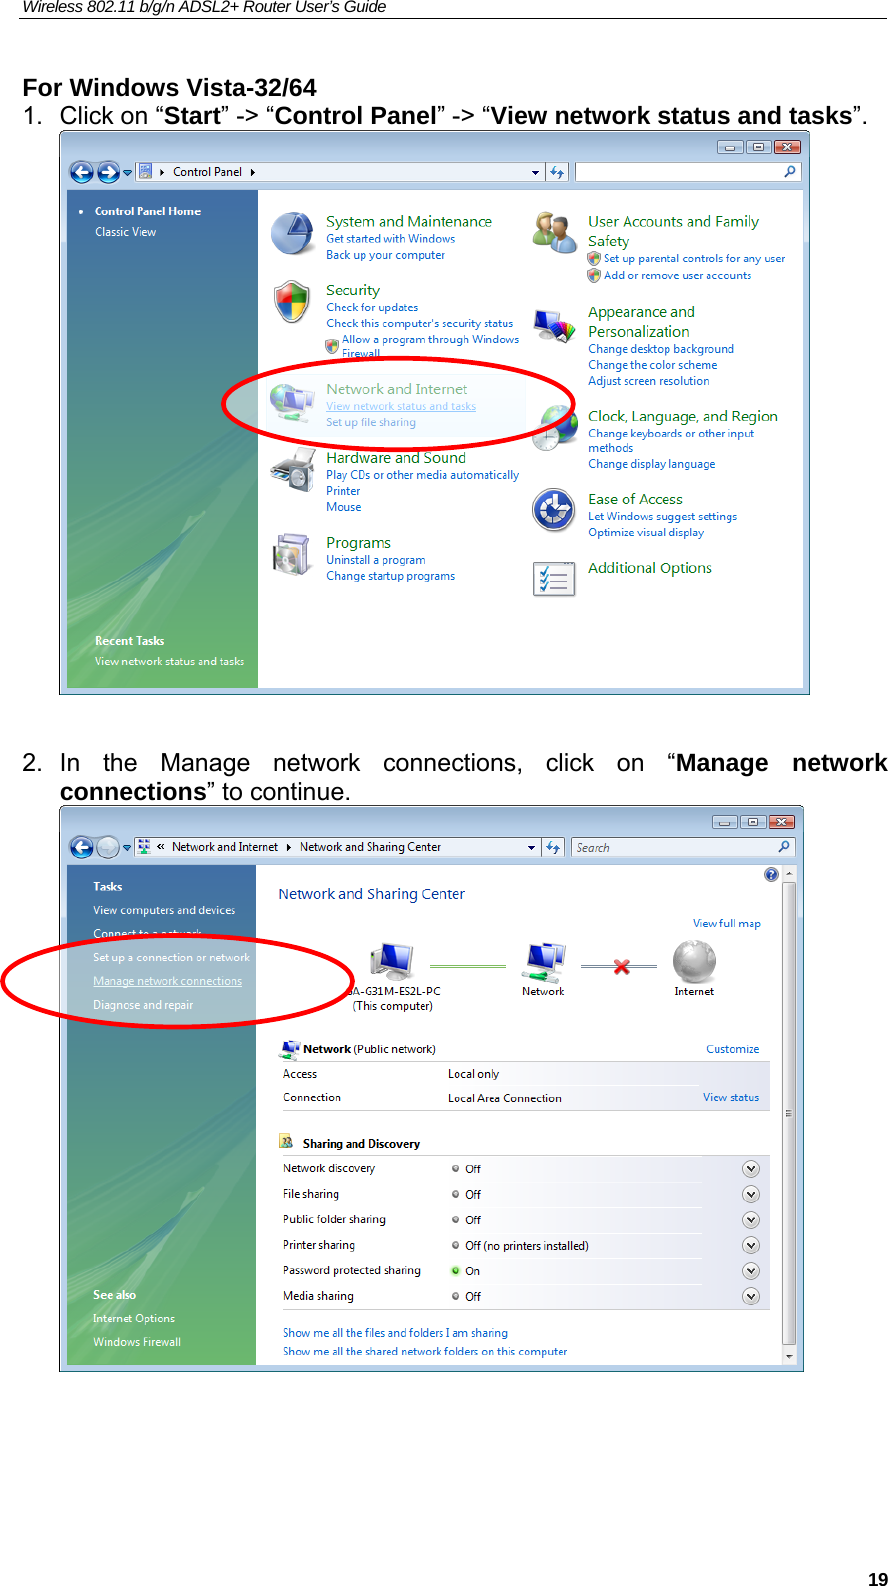 Wireless 802.11 b/g/n ADSL2+ Router User’s Guide    For Windows Vista-32/64 1.  Click on “Start” -&gt; “Control Panel” -&gt; “View network status and tasks”.   2. In the Manage network connections, click on “Manage network connections” to continue.      19